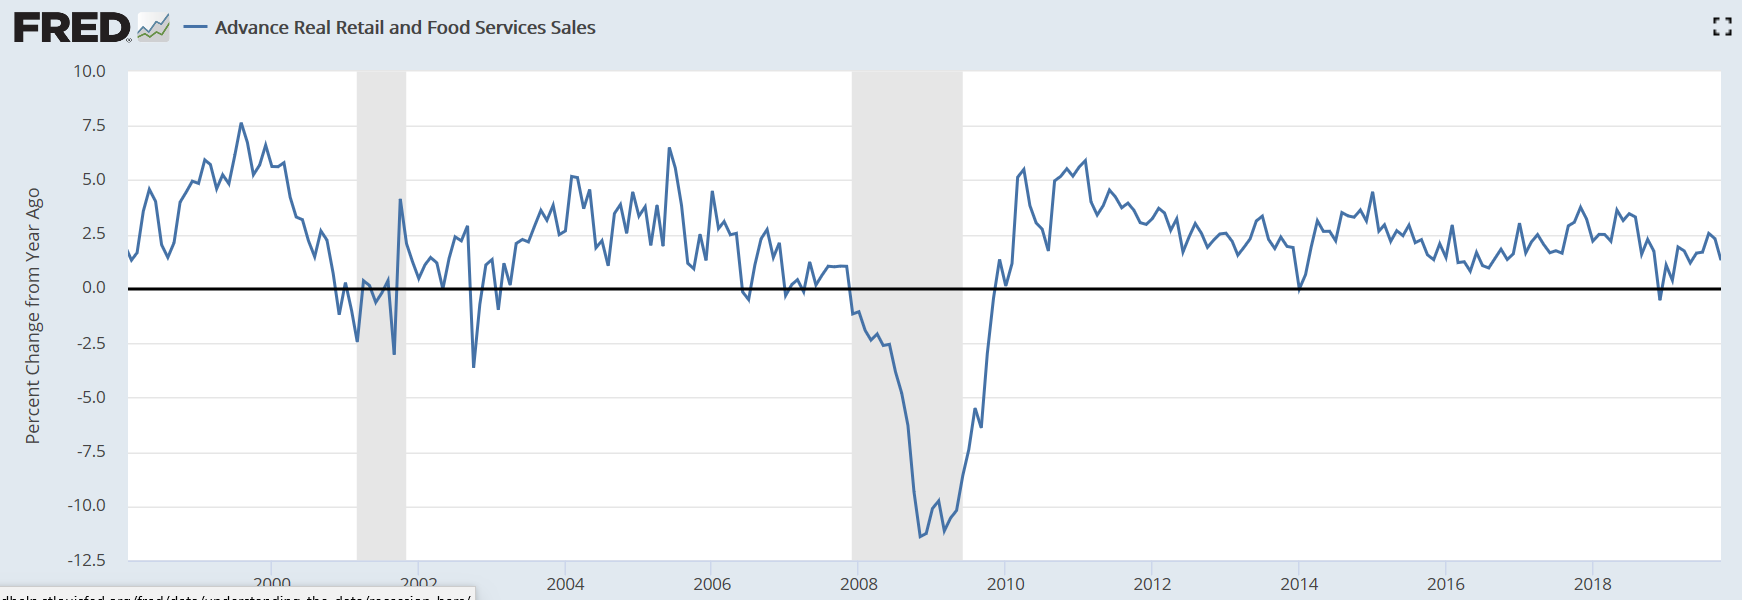 Rig count, Retail sales, Industrial production, NY Manufacturing, Atlanta Fed